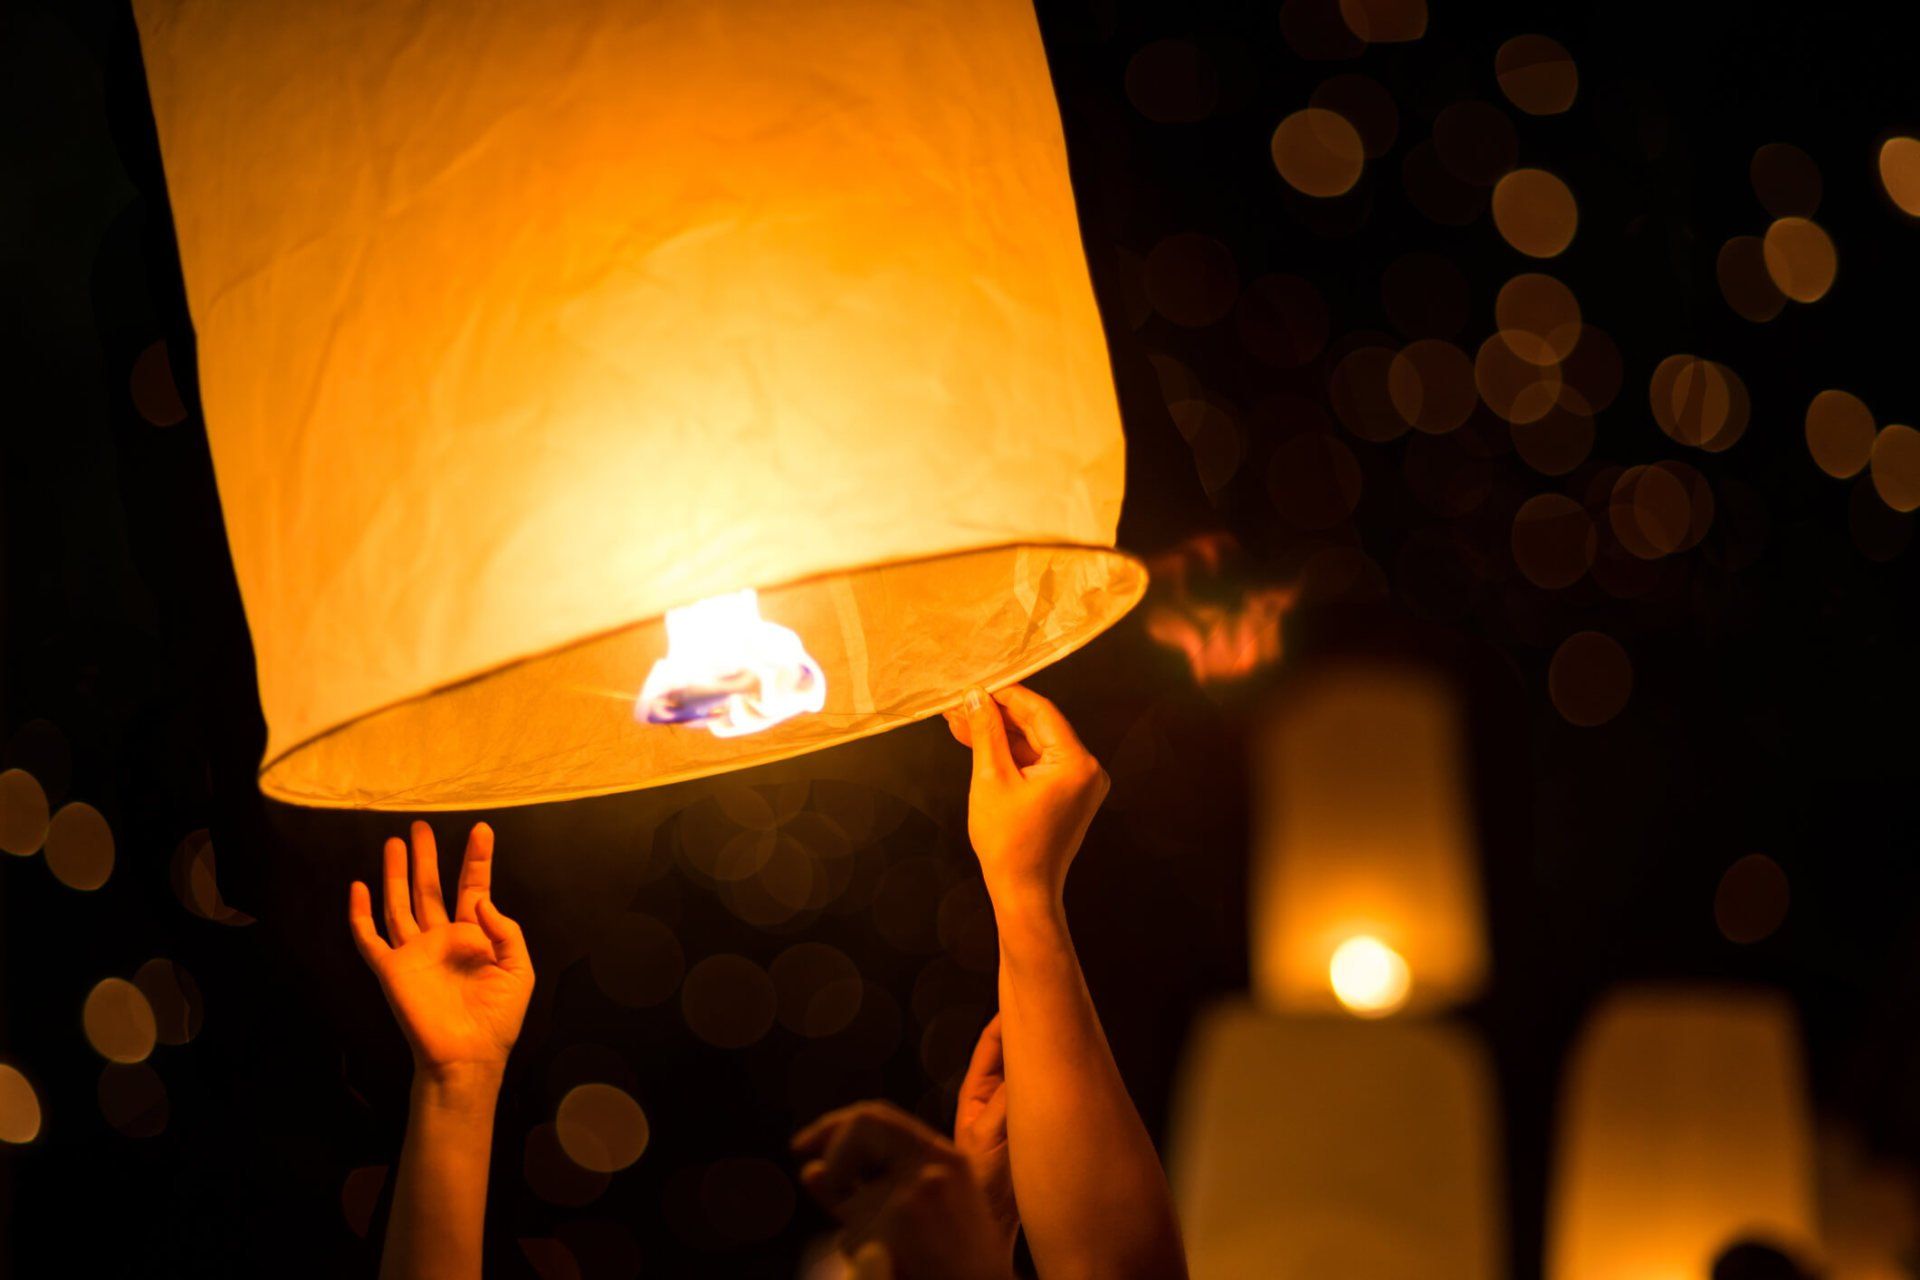 Releasing lanterns at an ash scattering service